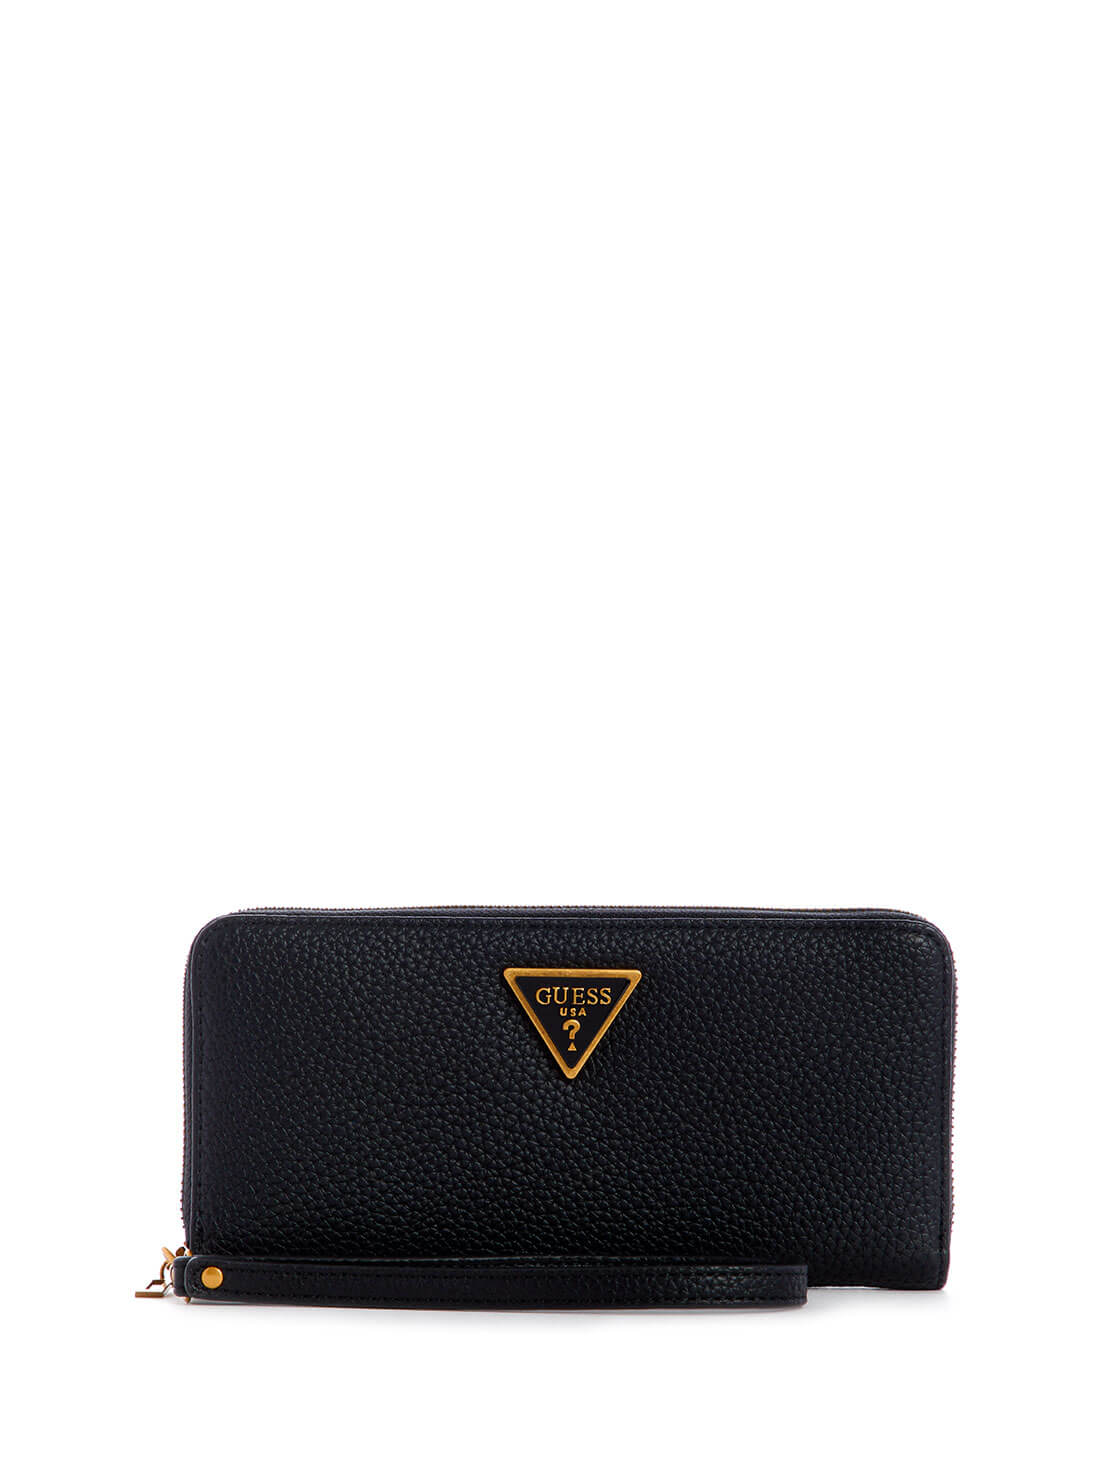 GUESS Womens Black Downtown Chic Large Wallet VB838546 Front View